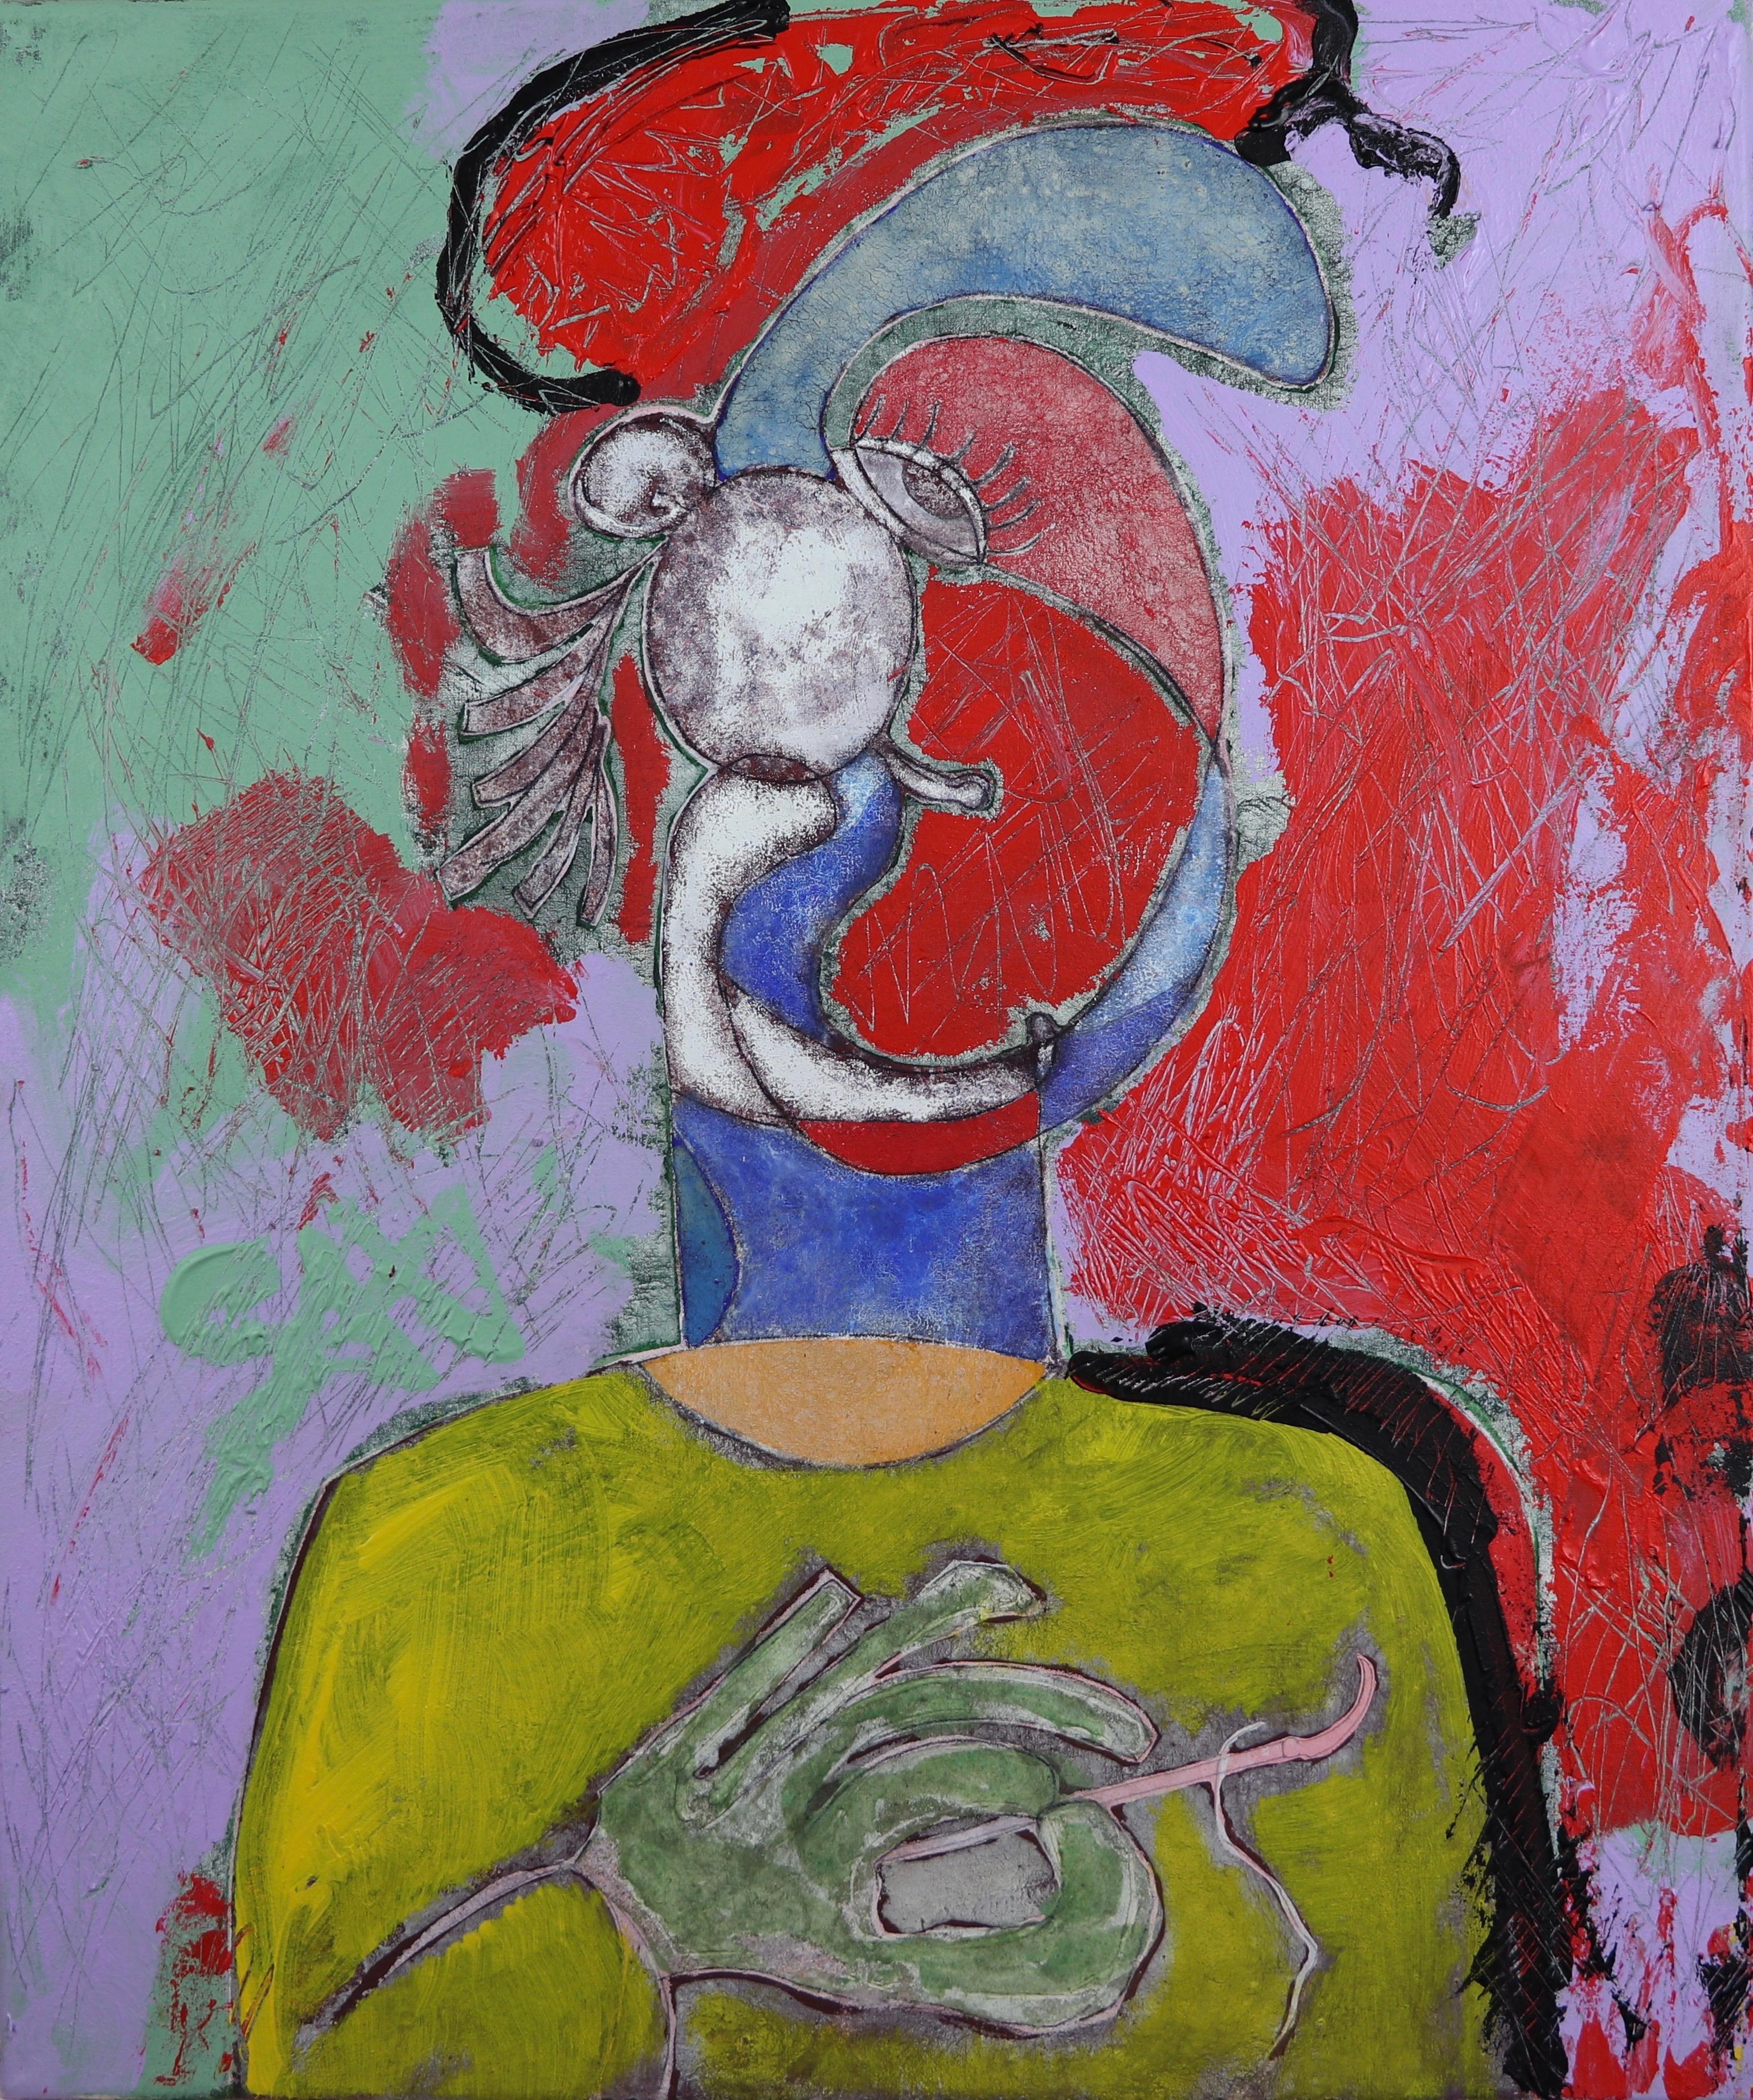 Guardian Angel Selfie. Neo Expressionist Painting - Art by Sax Berlin